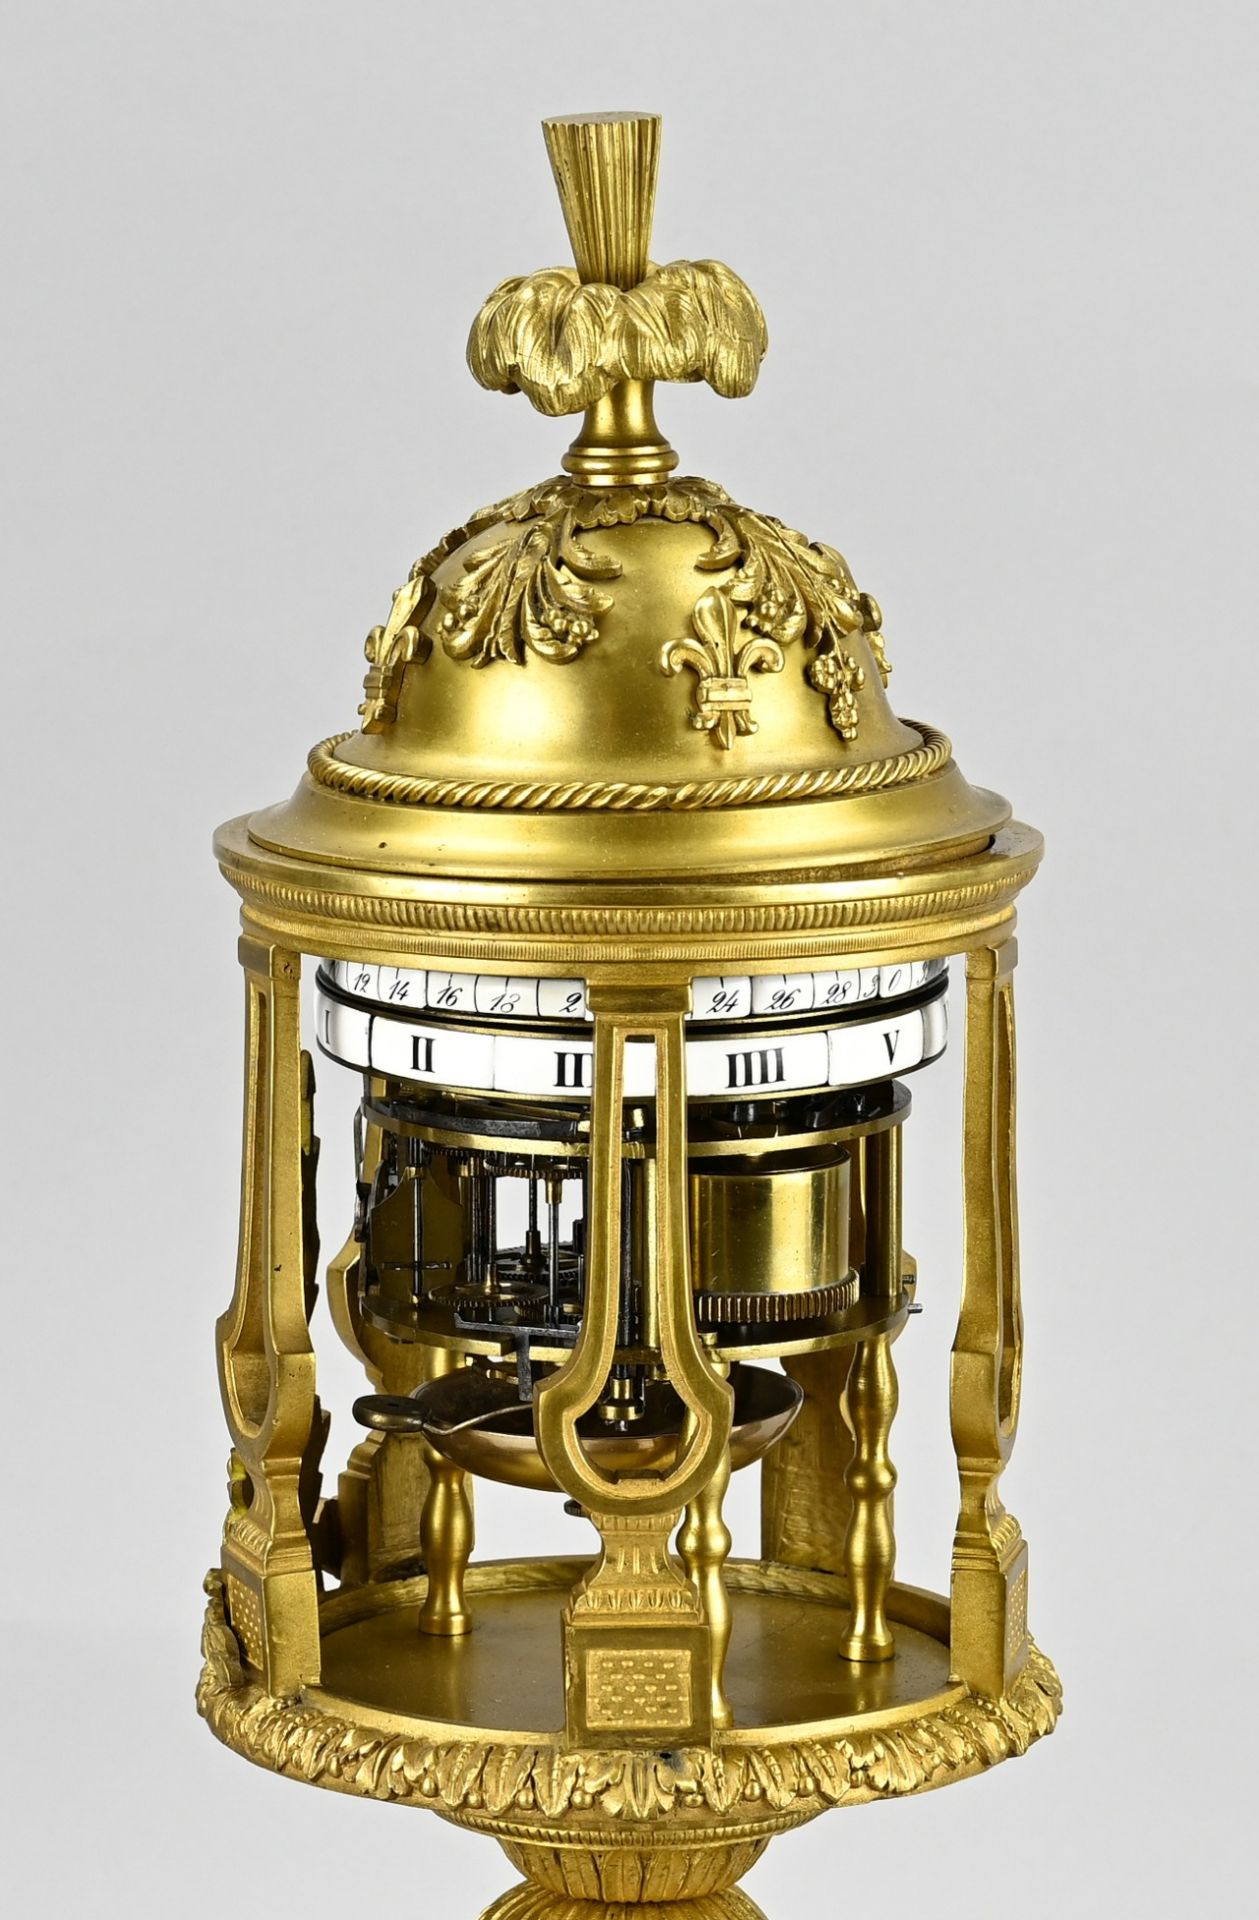 French Cercle Tournant clock, H 44 cm. - Image 2 of 2